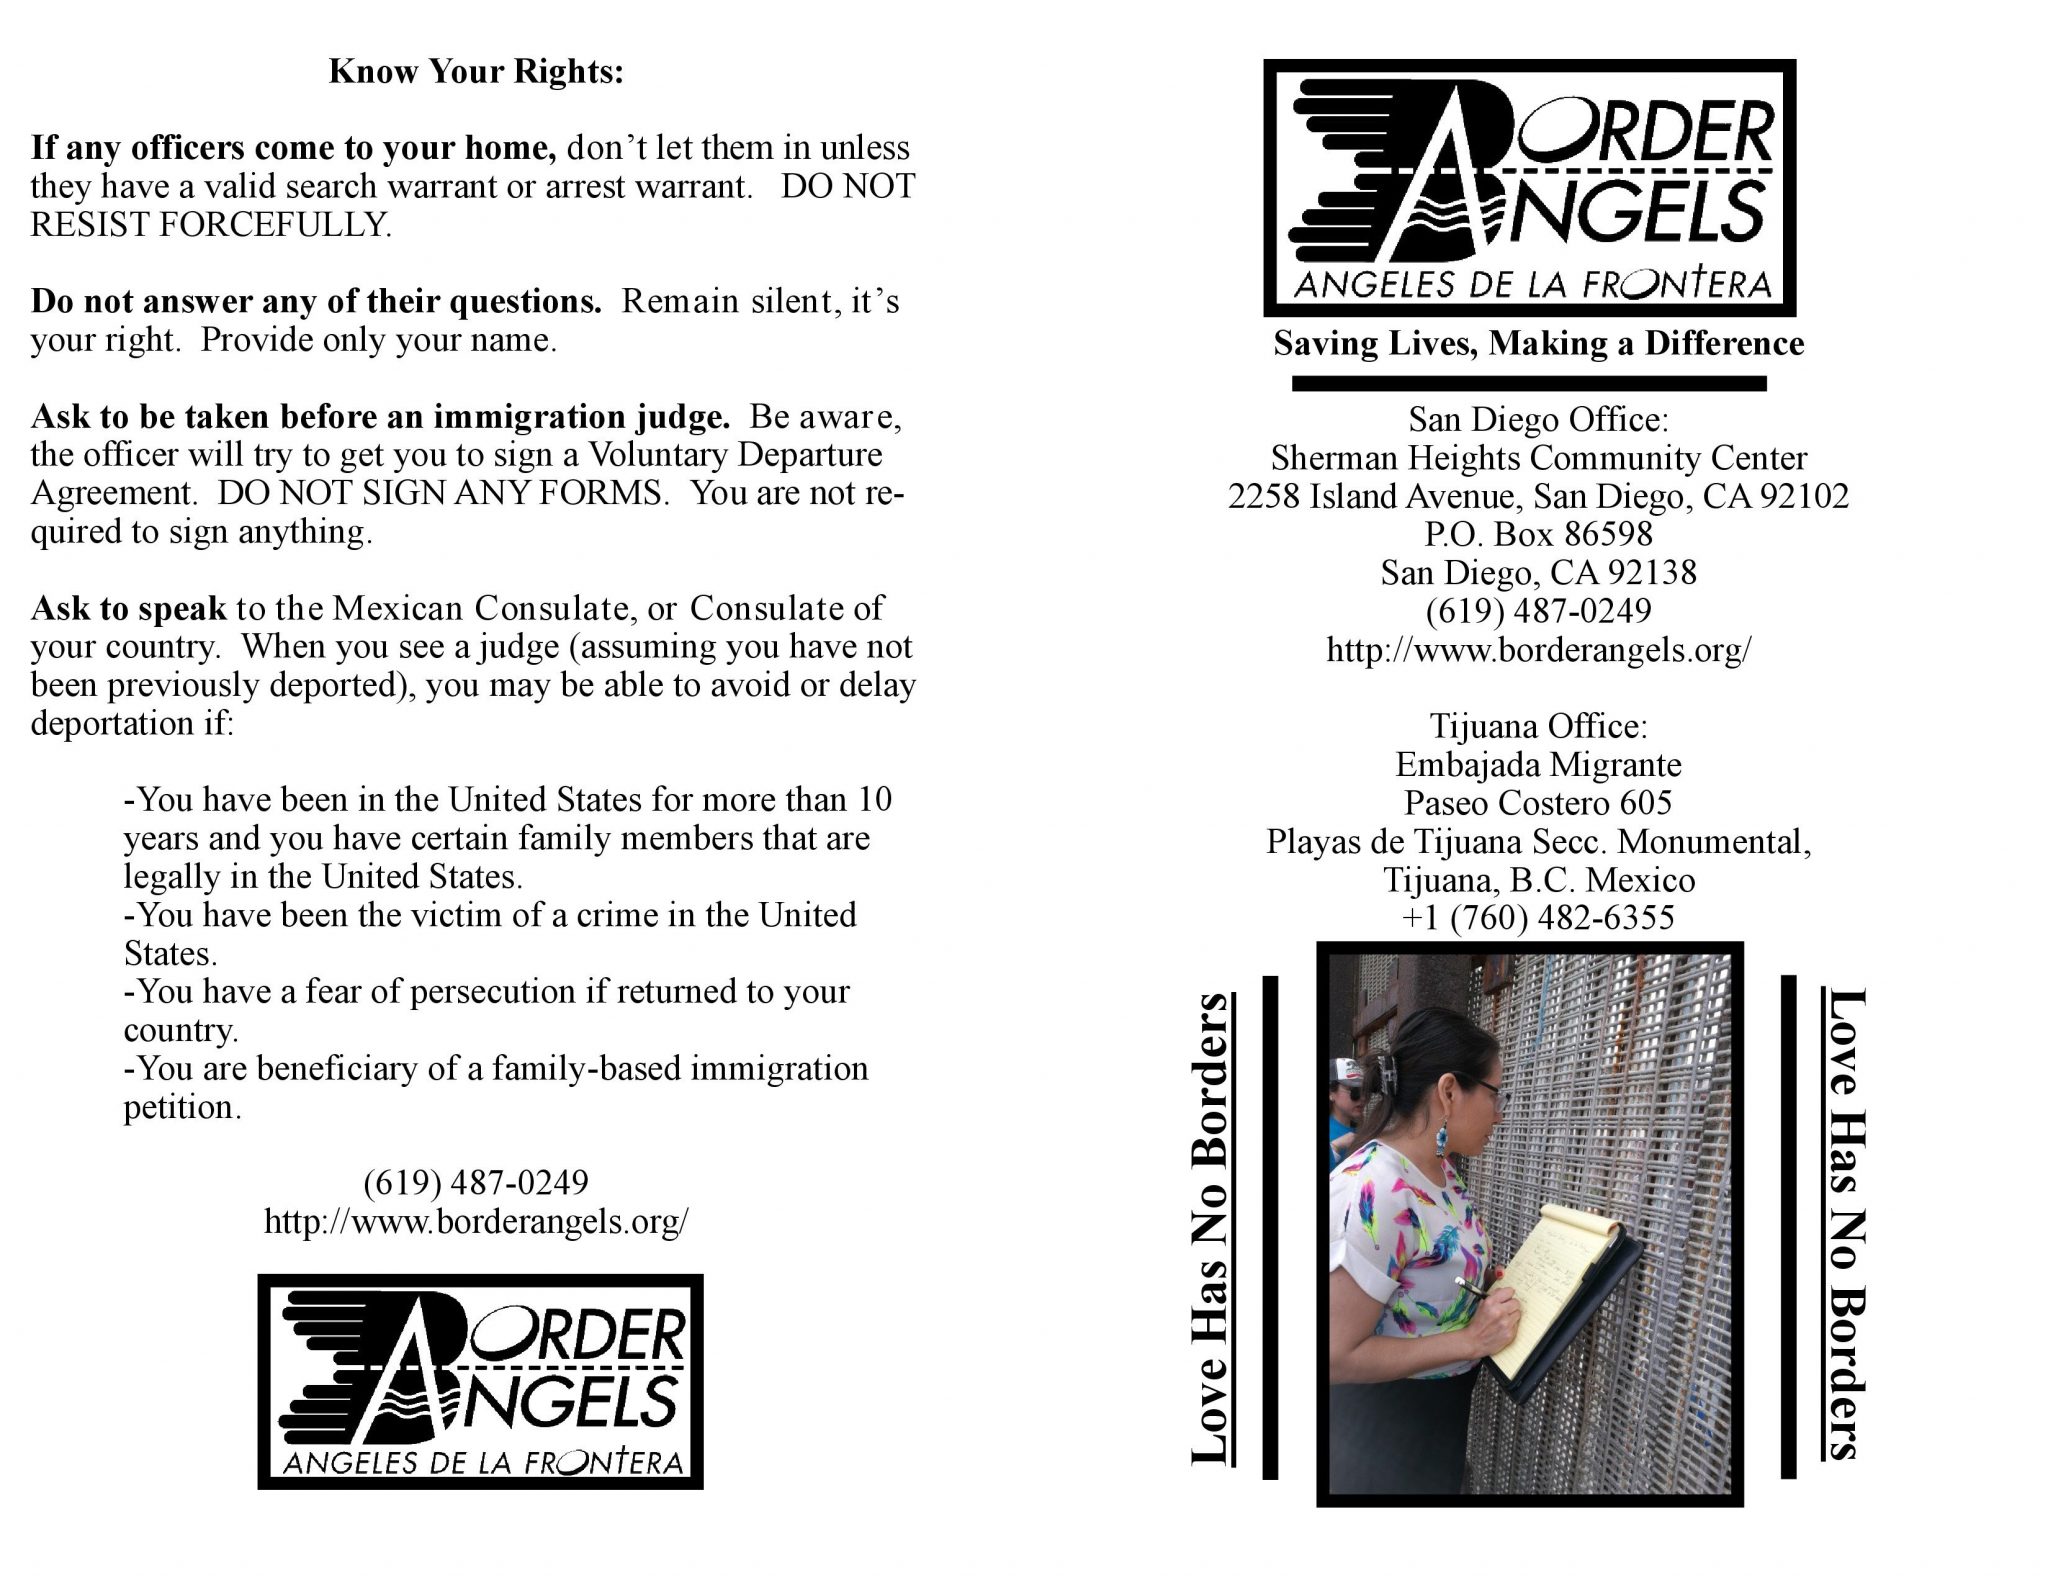 Know your rights, Border Angels